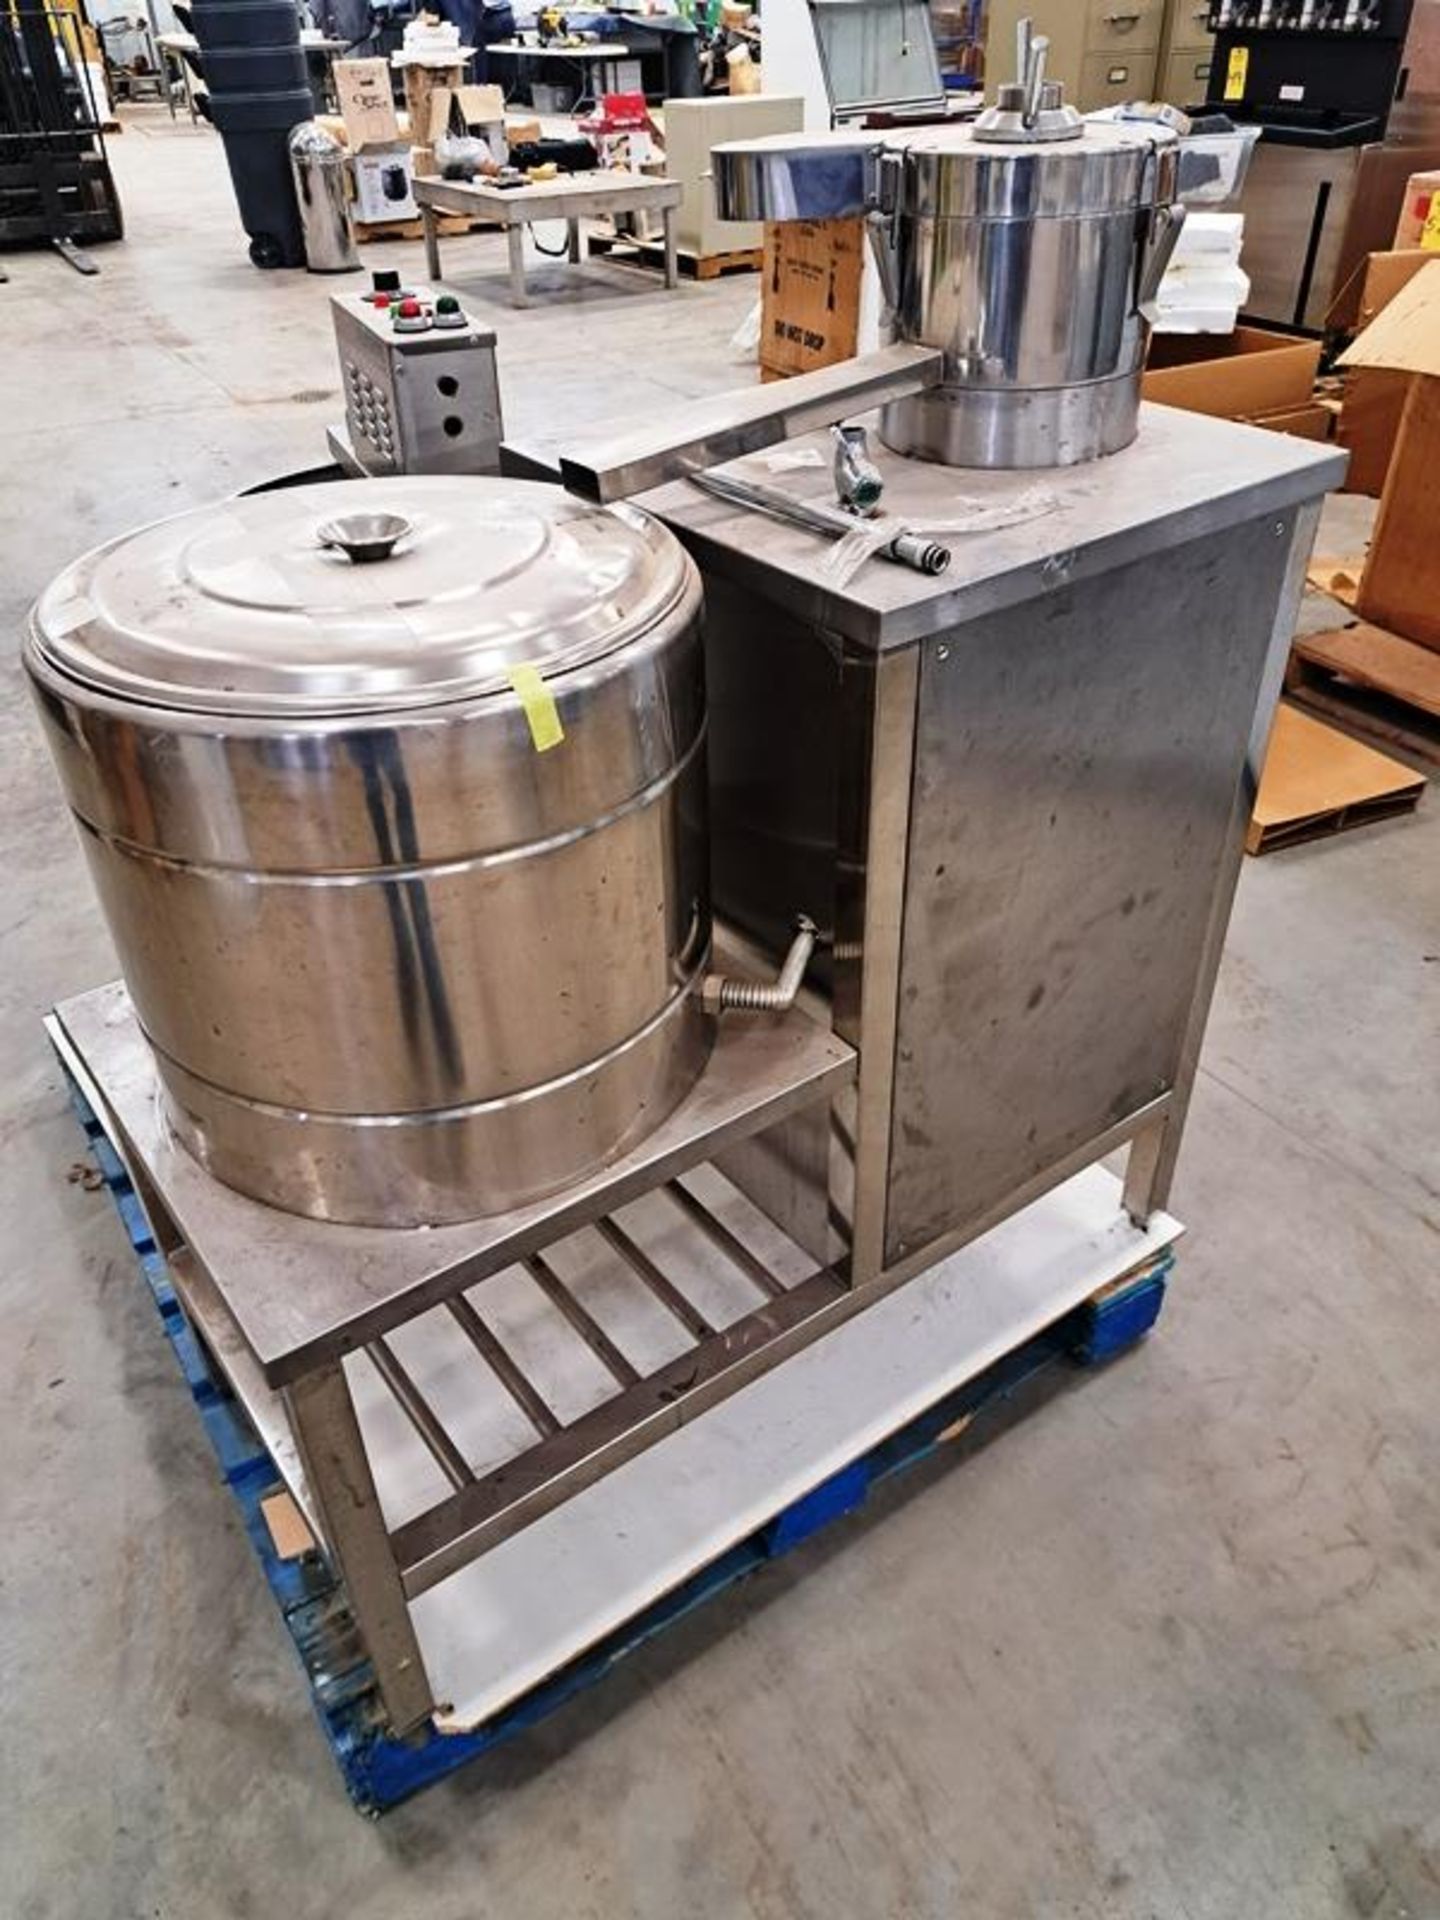 Toni Mdl. FT-10 Stainless Steel Electrothermal Soy Milk Machine (Required Loading Fee: $25.00) NO - Image 3 of 3